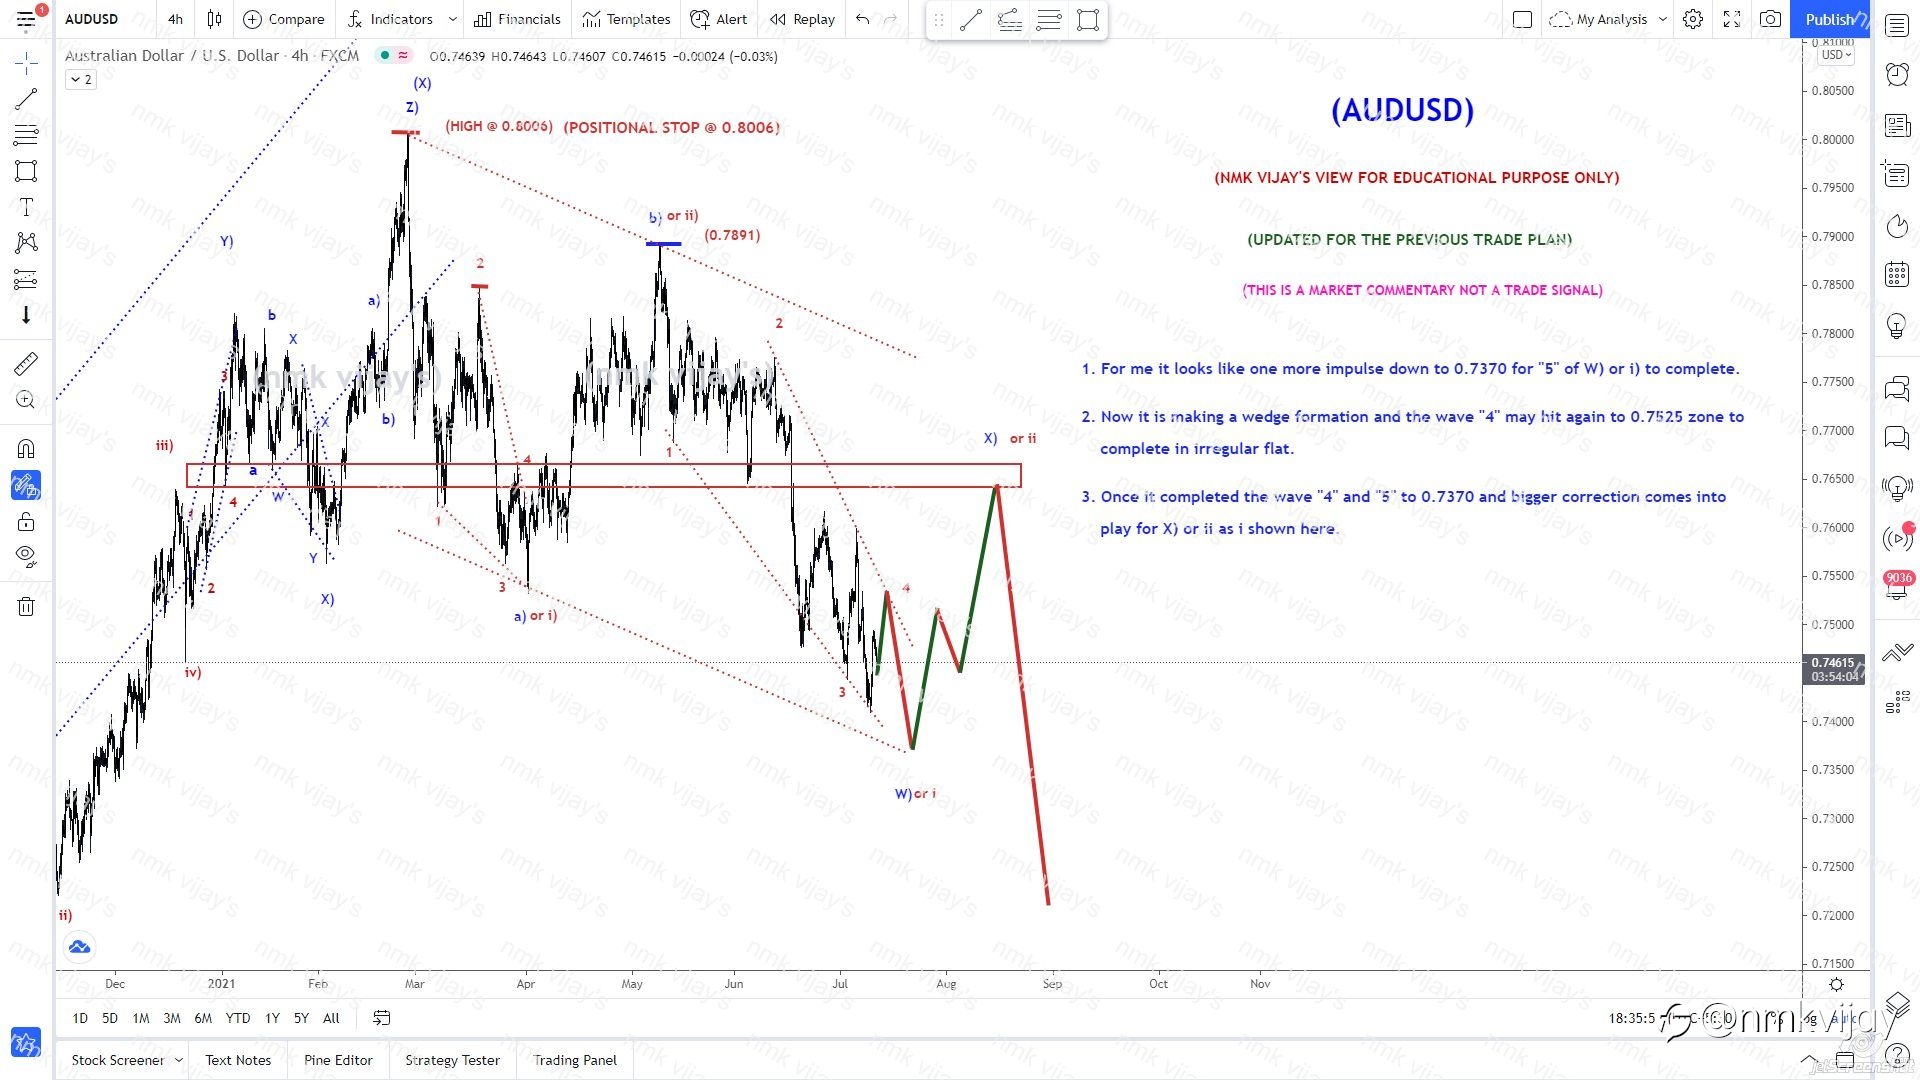 AUDUSD-Wave 5 to 0.7370 and now 4 to 0.7525 ?